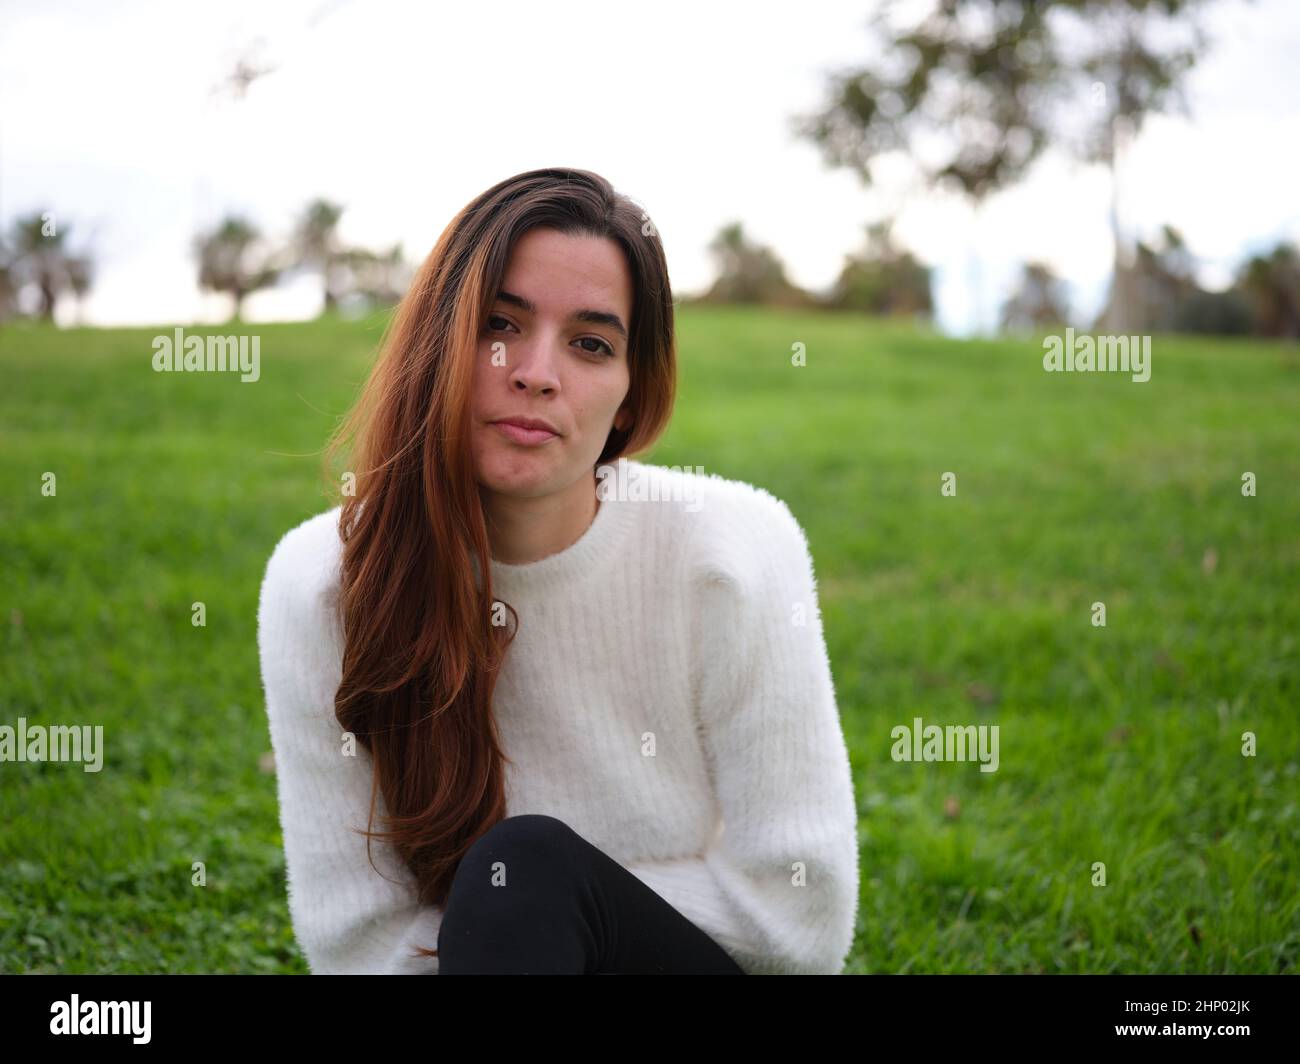 A scorned young woman in the park looking at the camera seriously Stock Photo